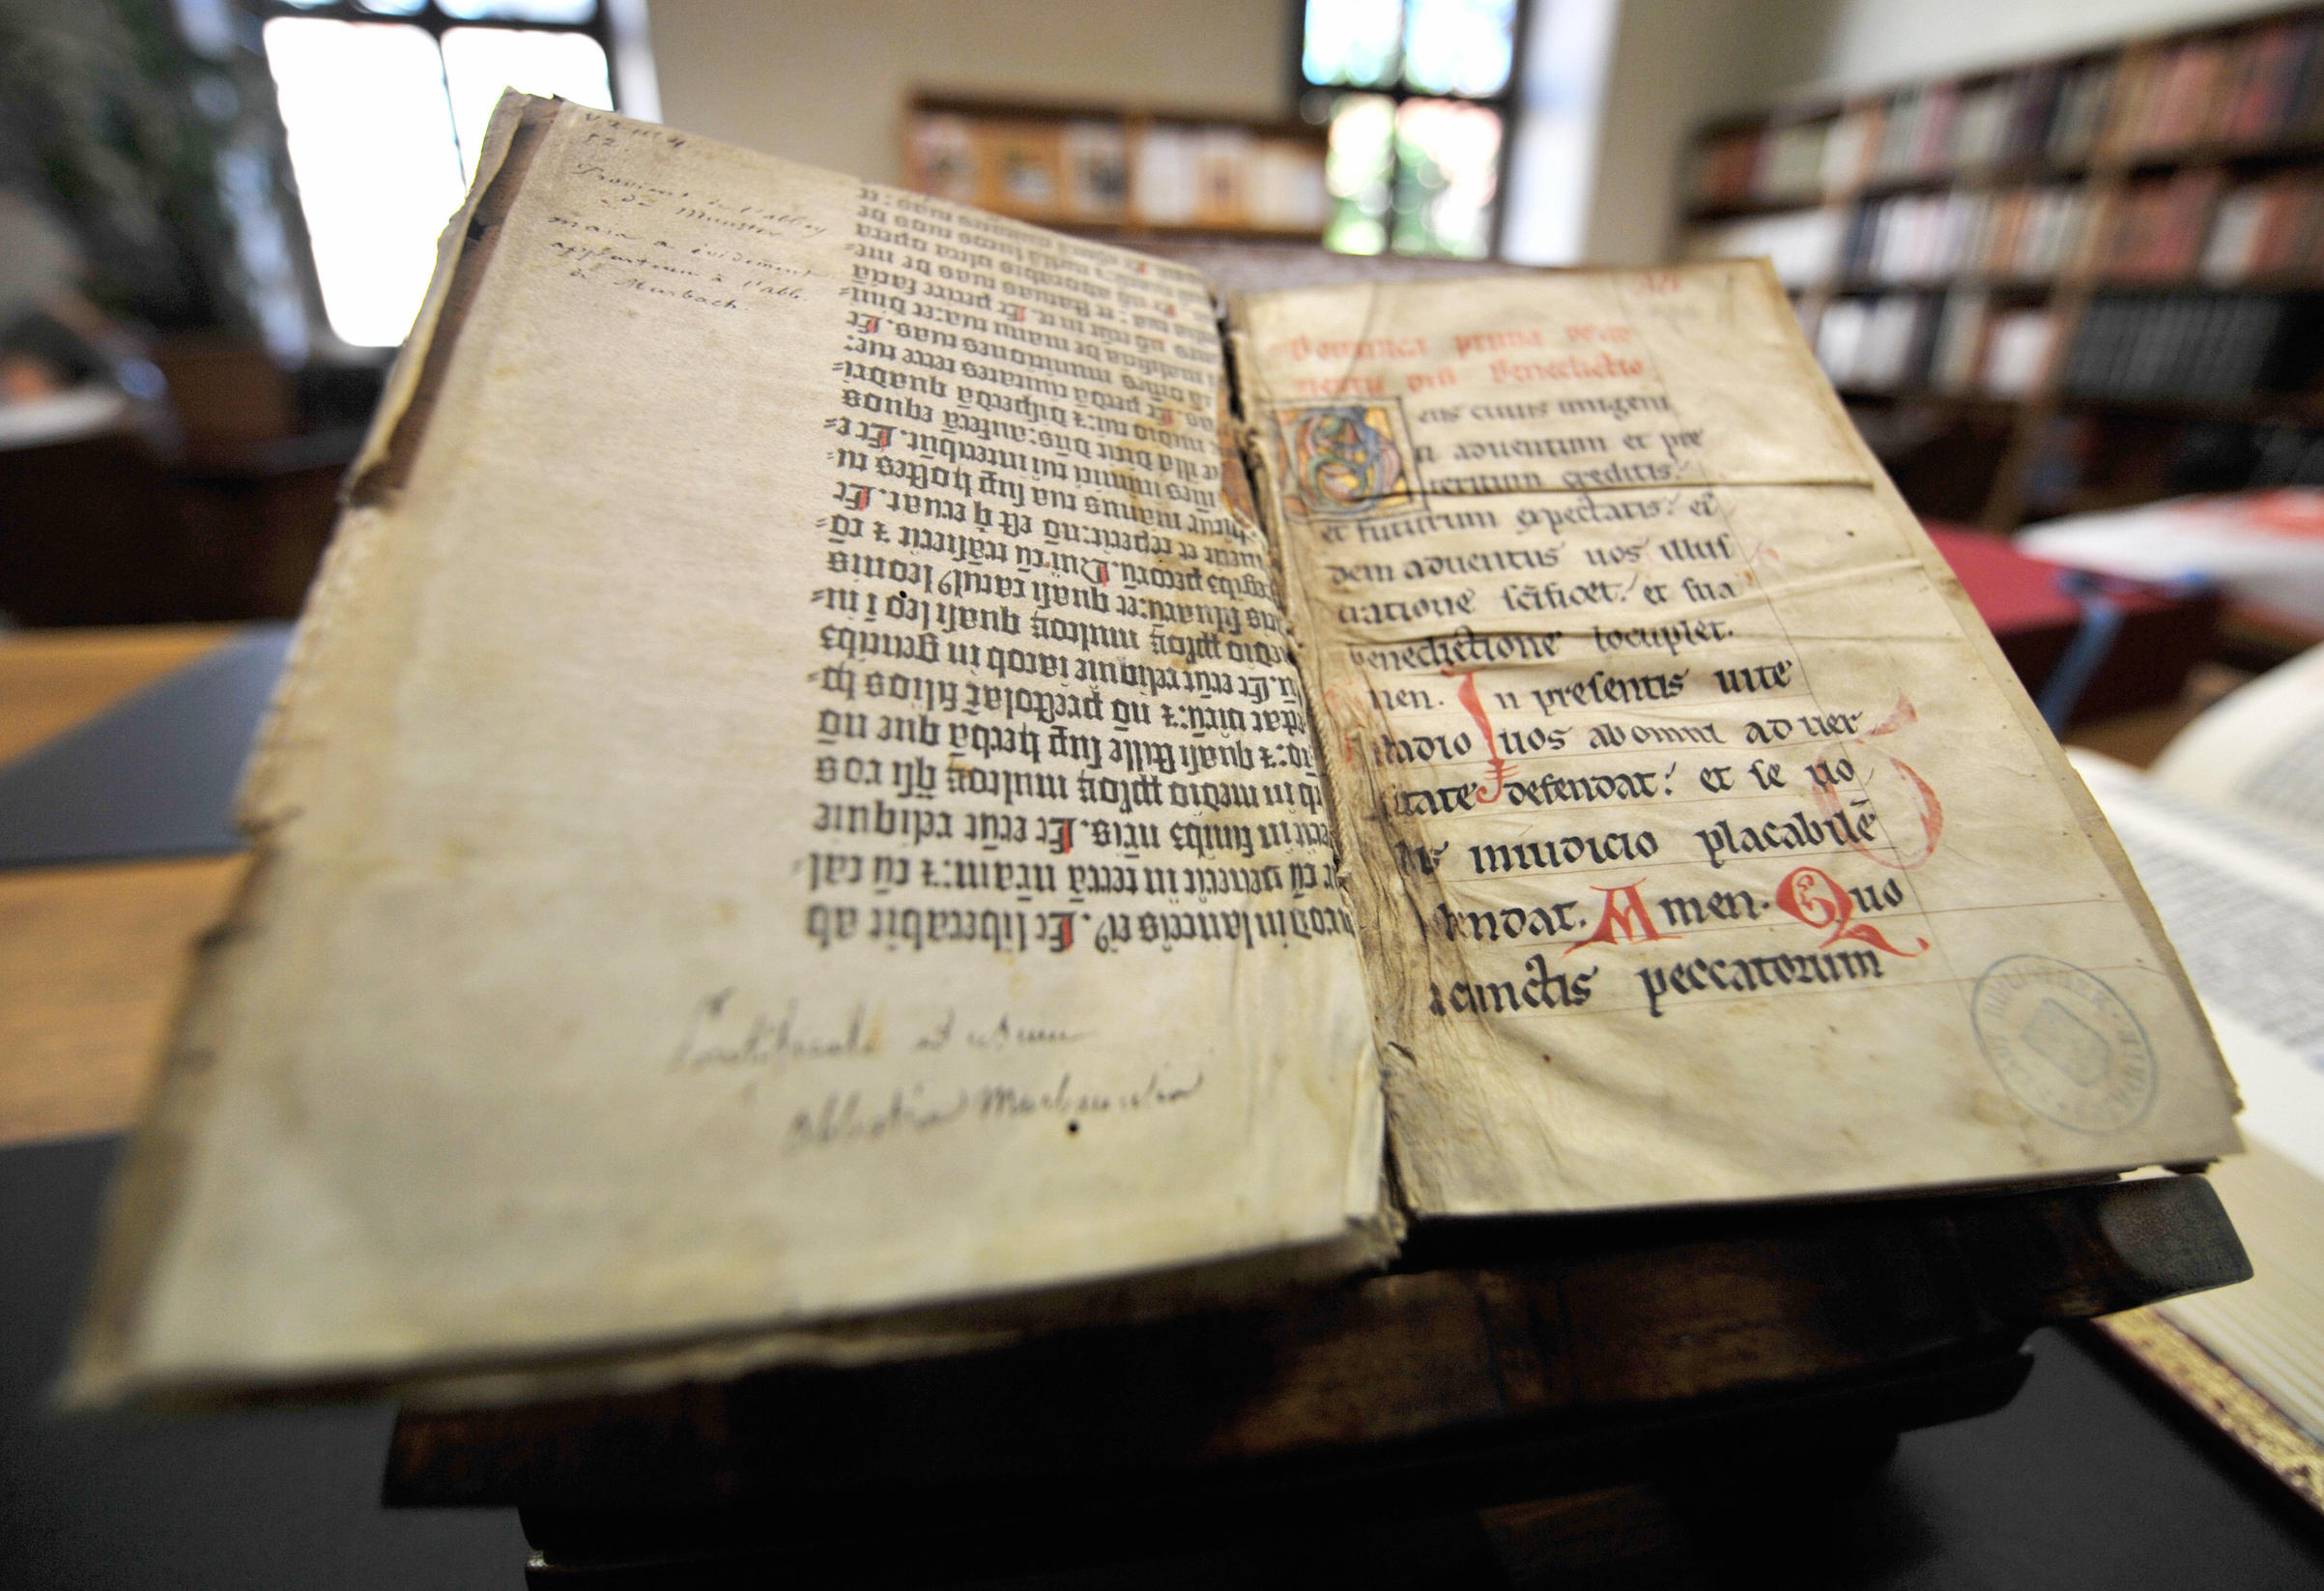 A picture taken on May 29, 2009 in Colmar, northeastern France, shows pages of the Gutenberg Bible discovered in a library by a library assistant, (Johanna Leguerre—AFP/Getty Images)